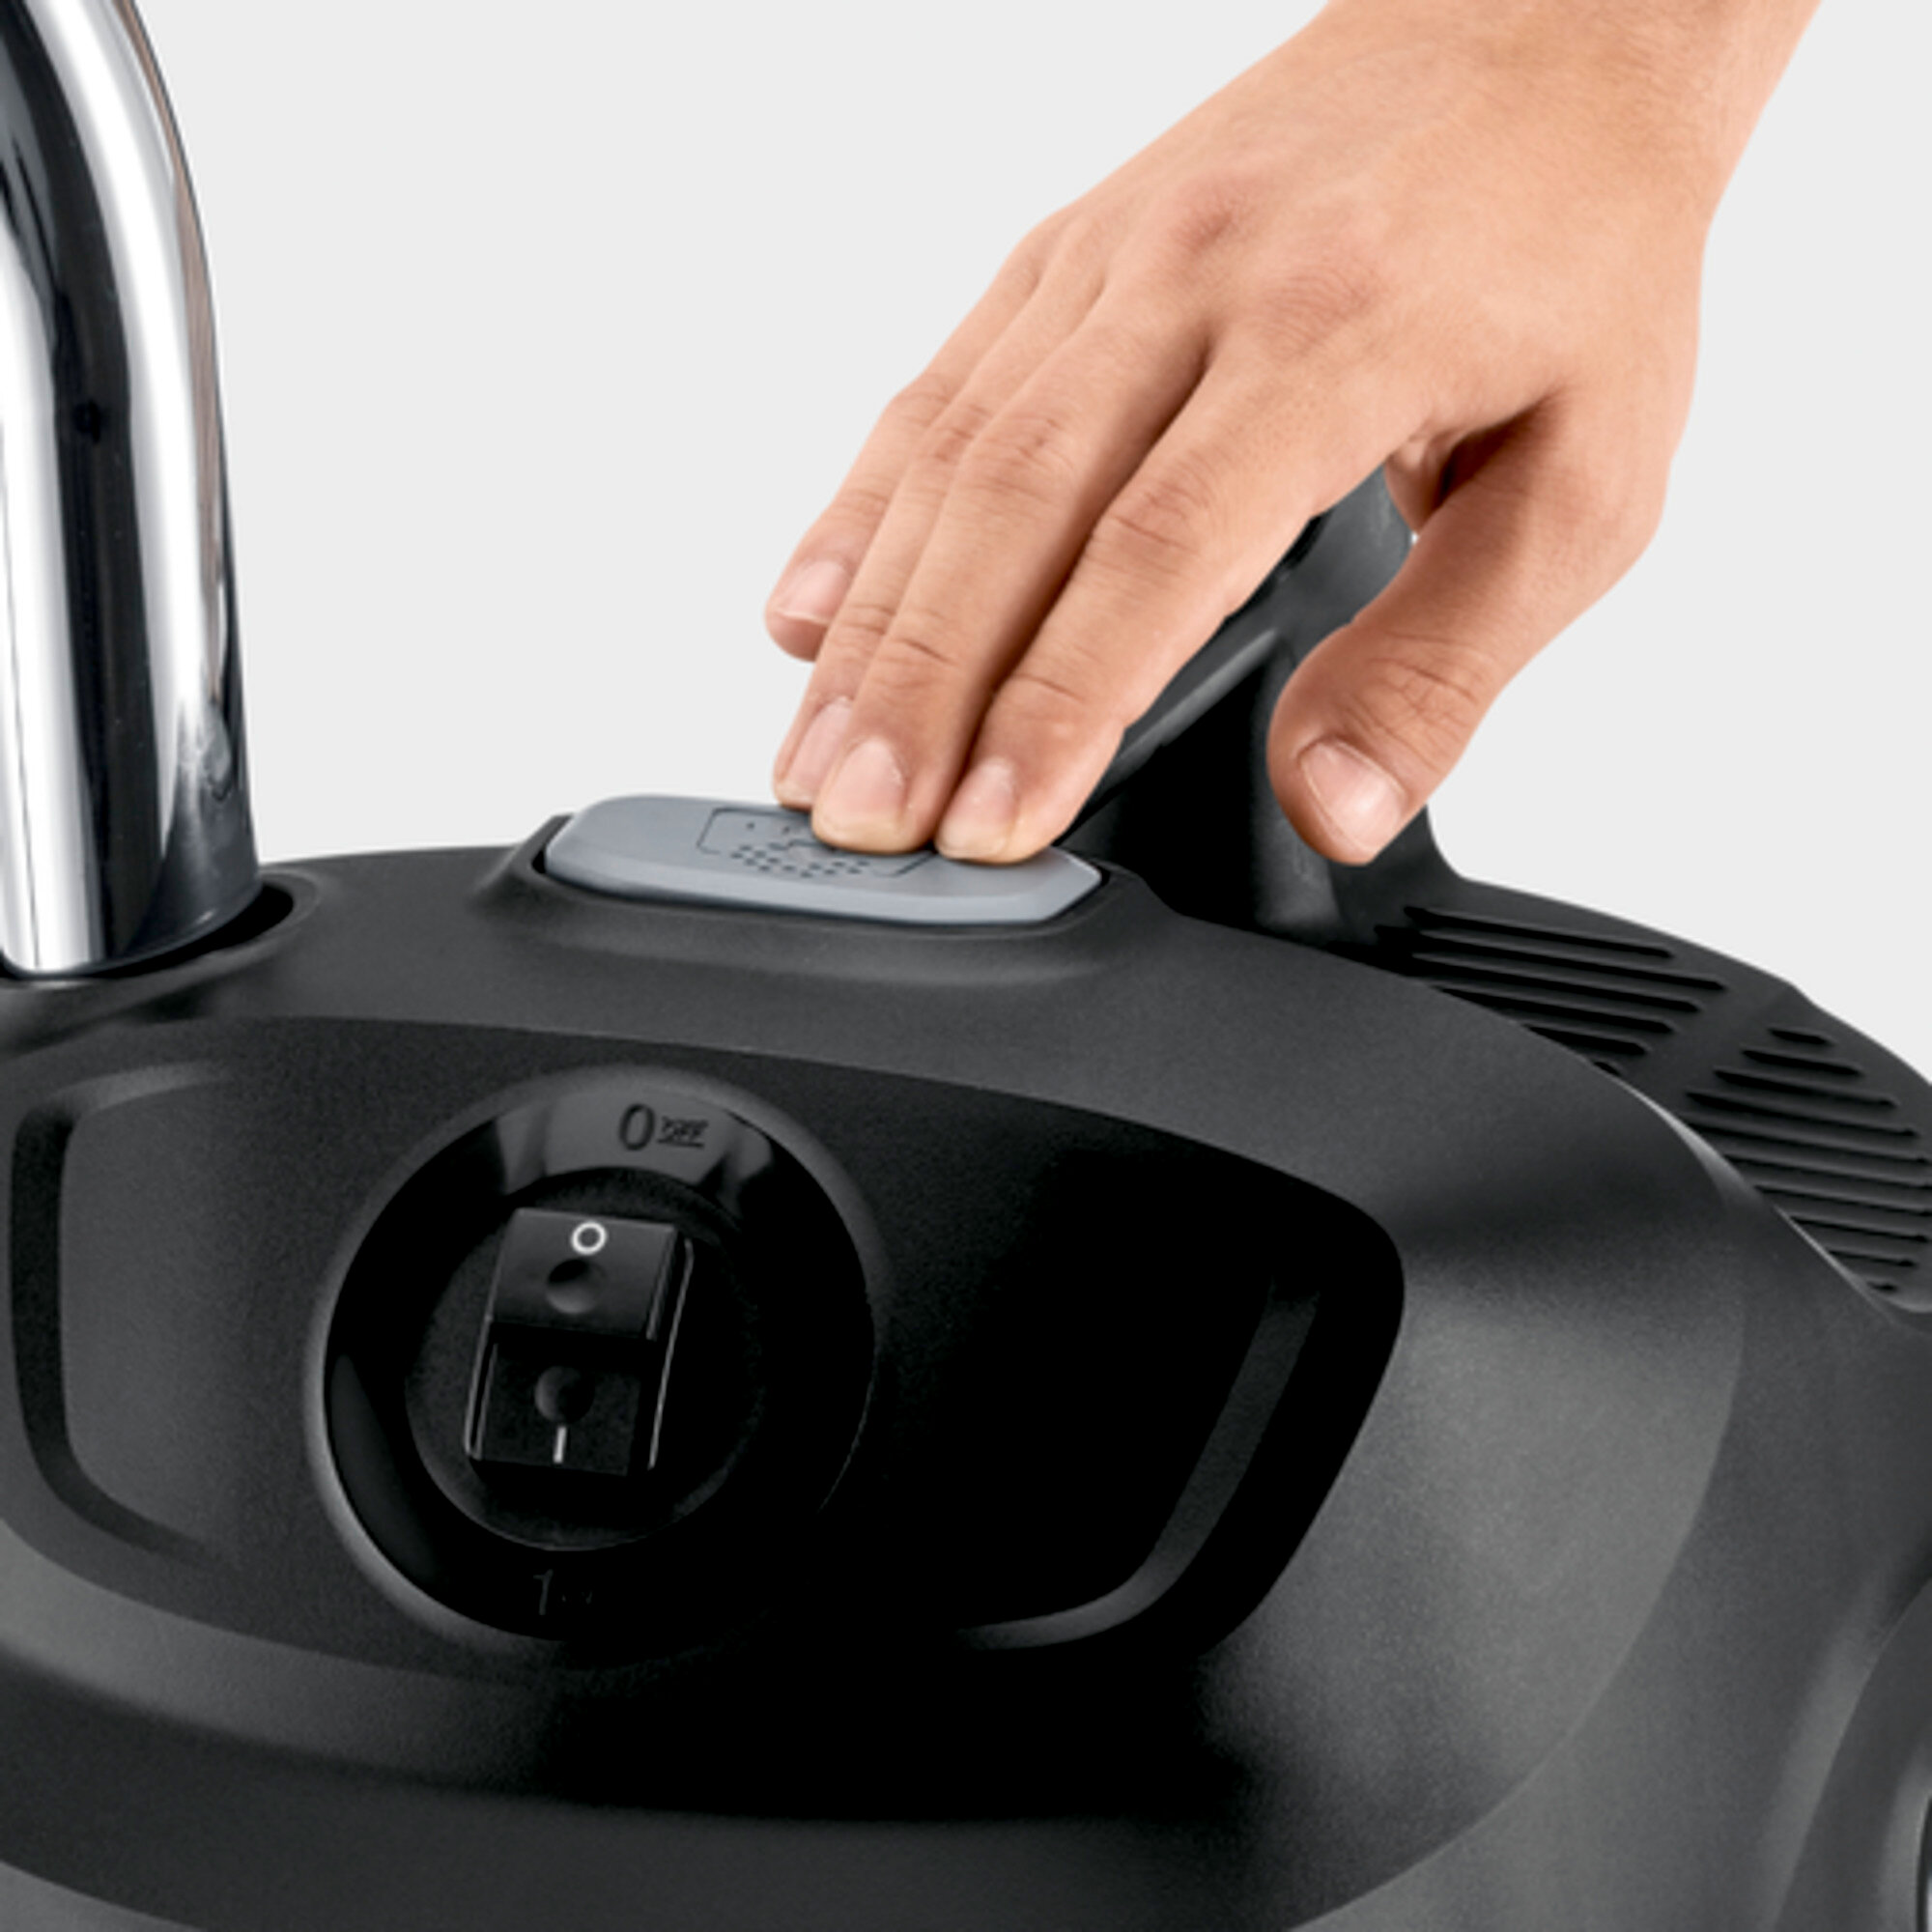 Ash and dry vacuum cleaner AD 2: Kärcher ReBoost filter cleaning technology – filter cleaning at the touch of a button